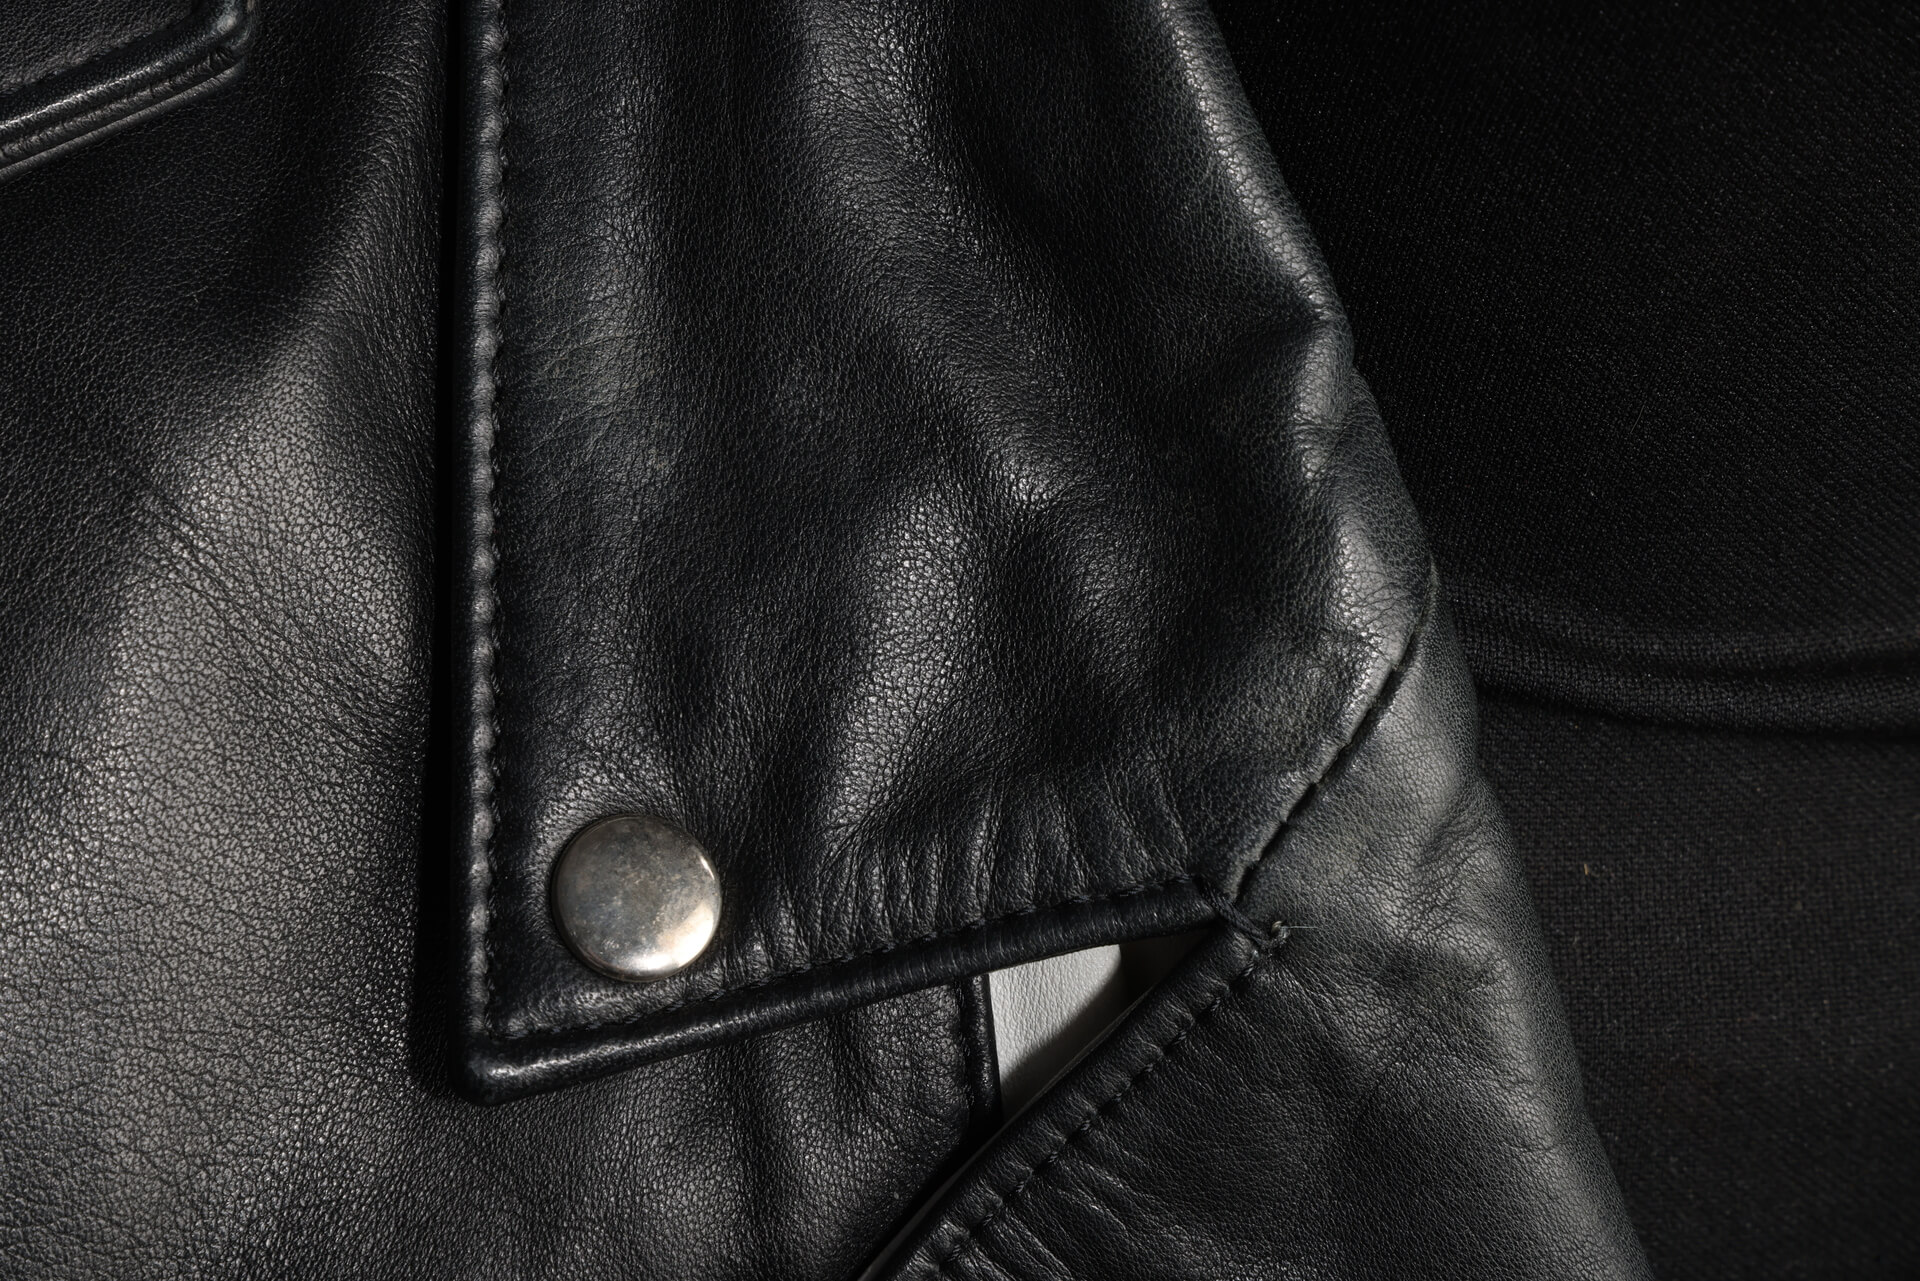 A close-up of the black and white leather jacket